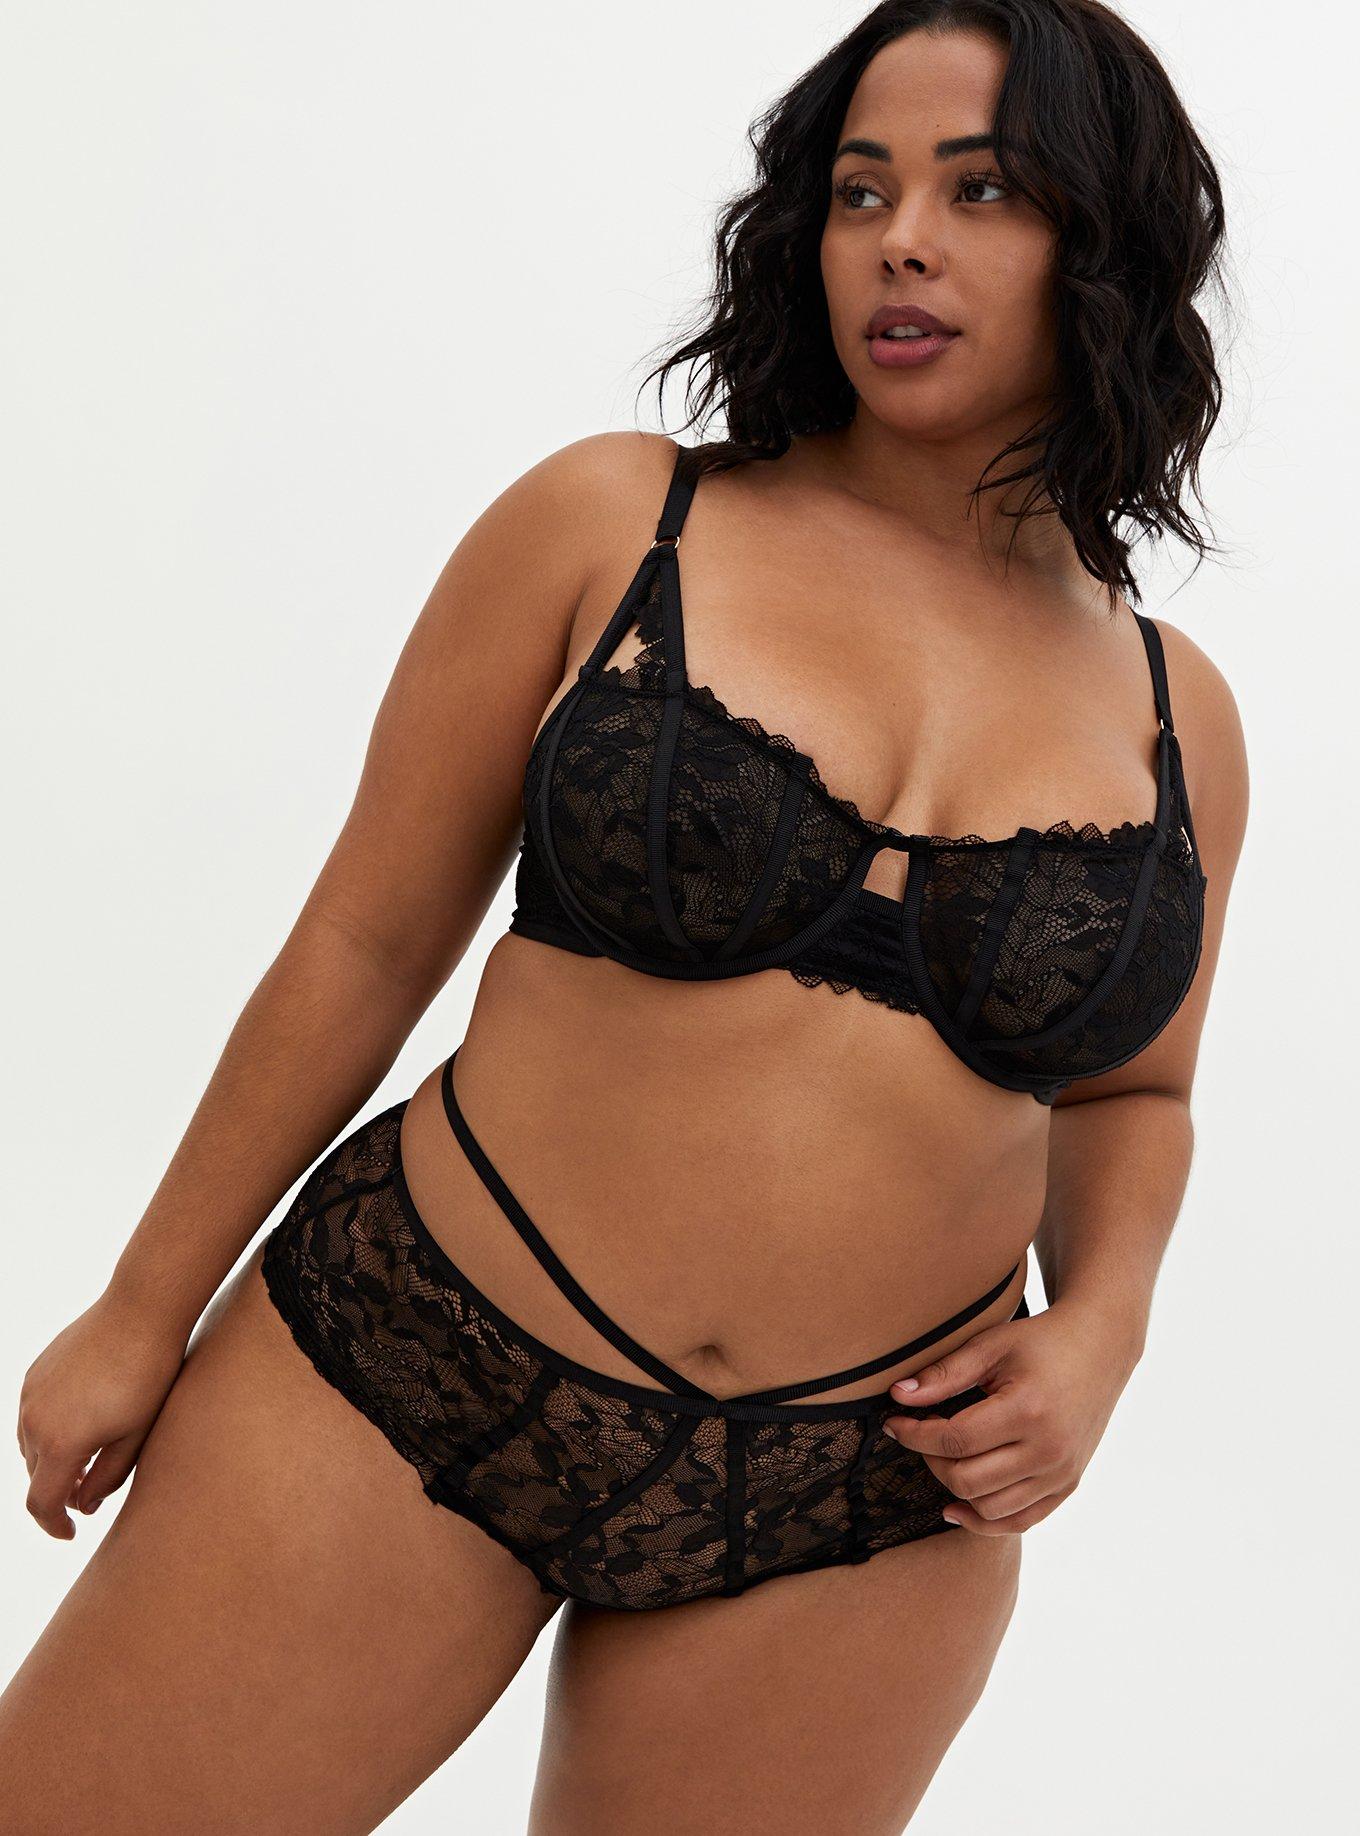 Out From Under Chantilly Lace Balconette Bra  Urban Outfitters Australia -  Clothing, Music, Home & Accessories